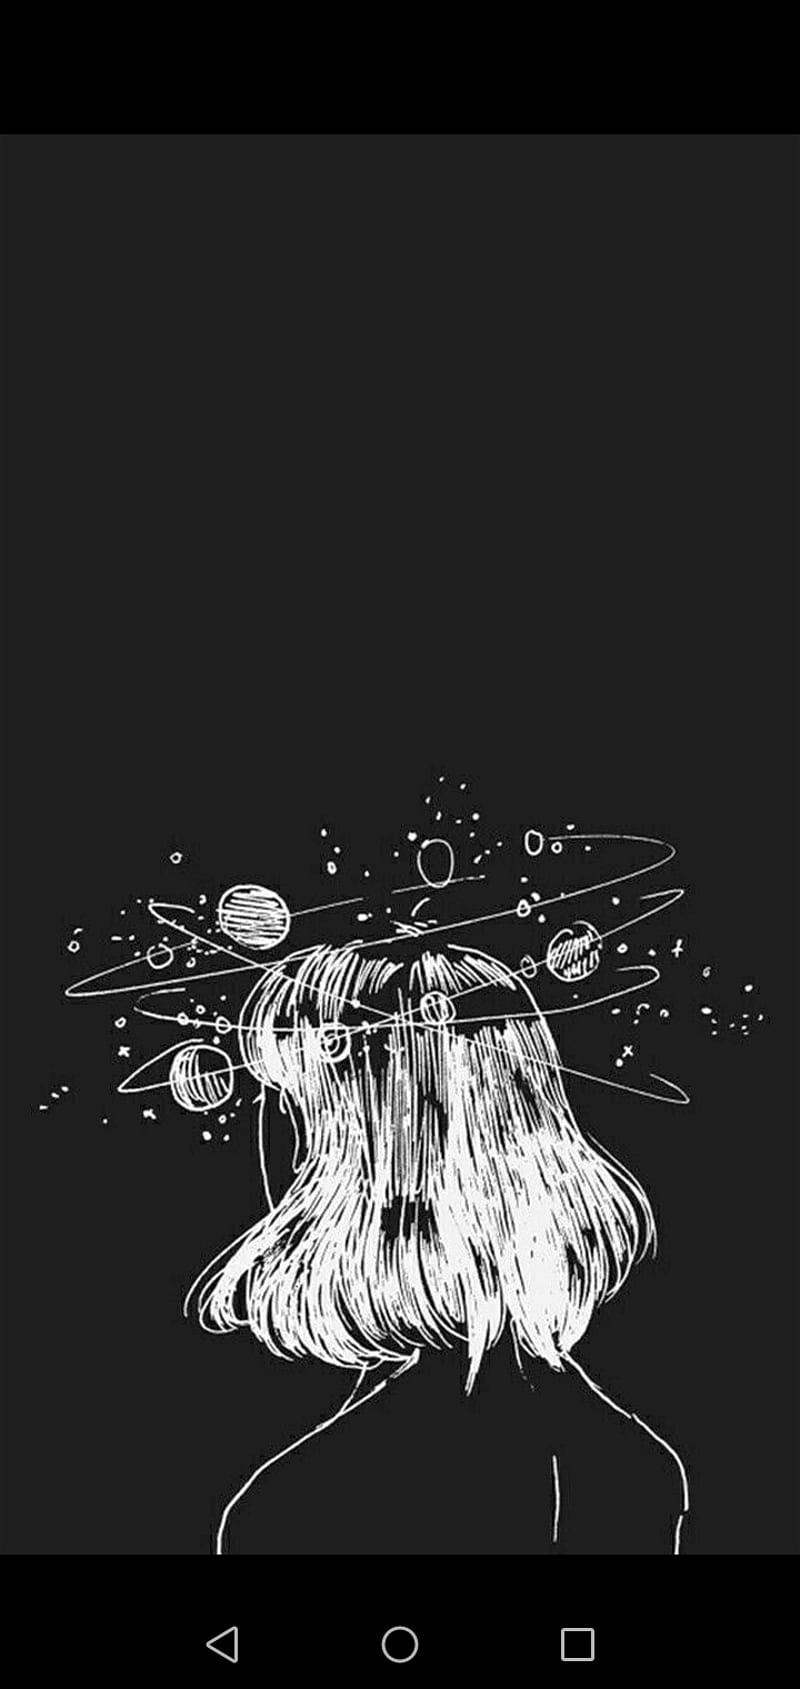 A black and white drawing of the woman with stars - White